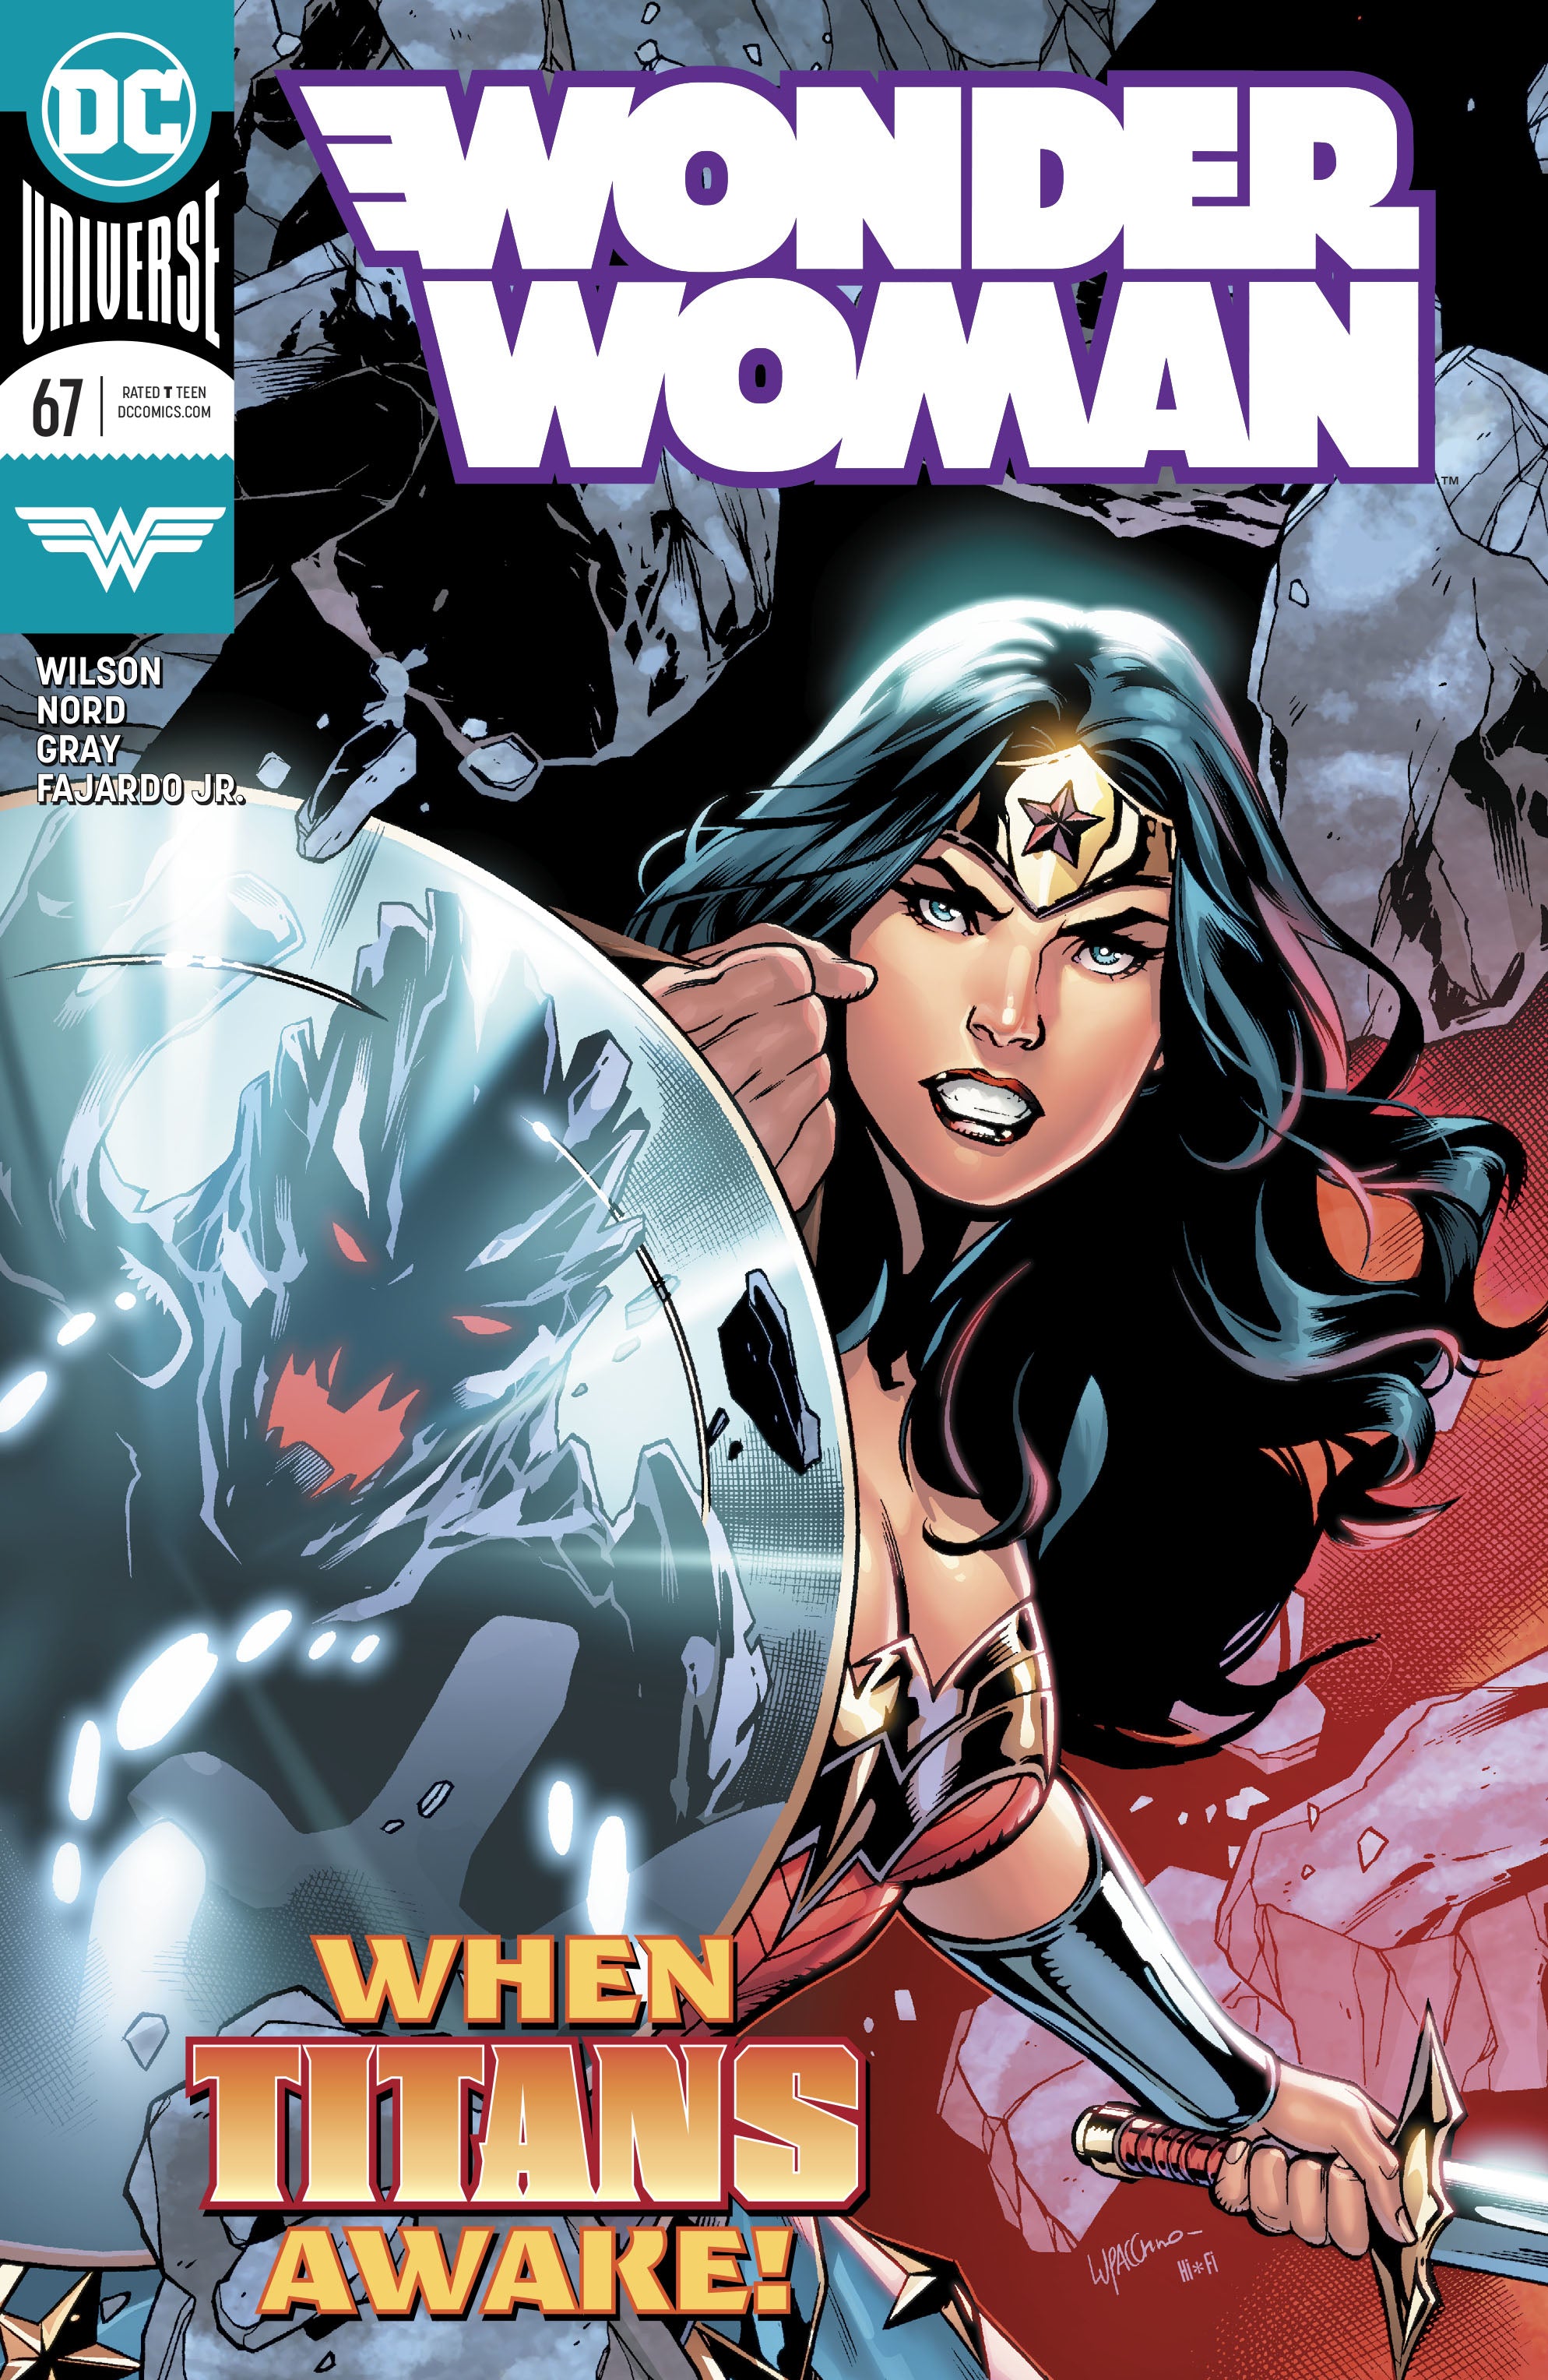 WONDER WOMAN #67 | Game Master's Emporium (The New GME)